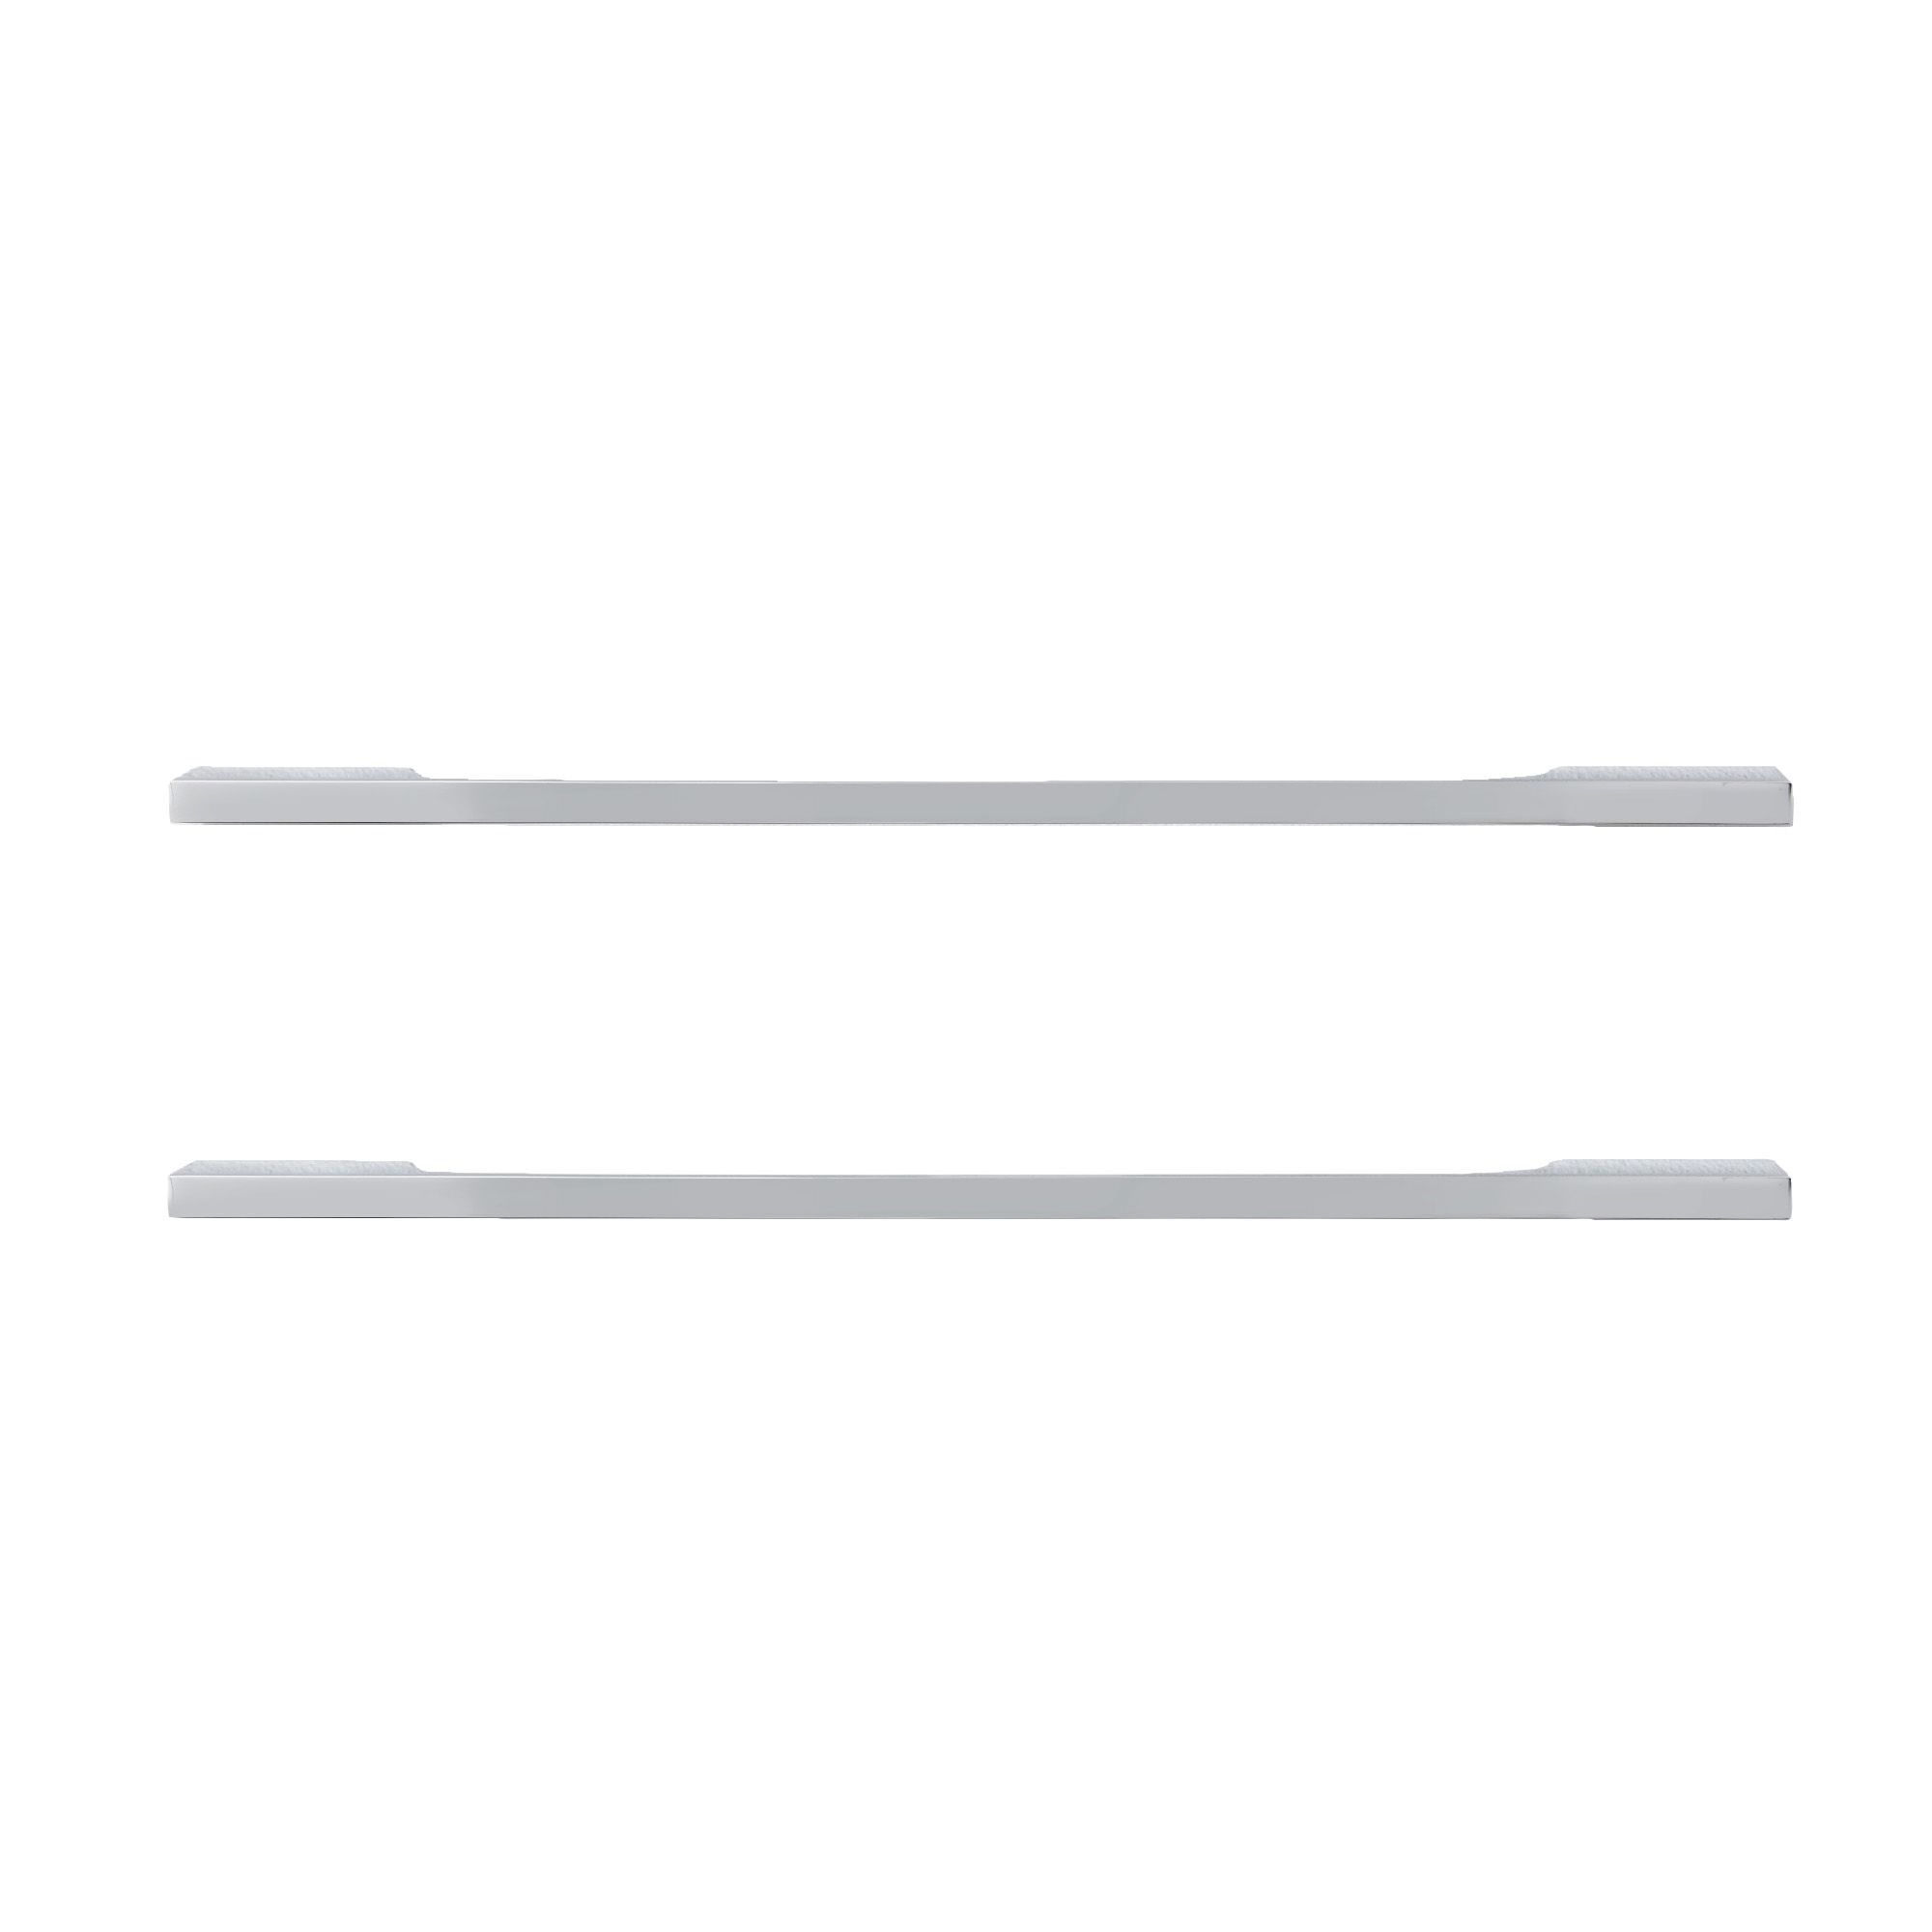 GoodHome Hikide Chrome effect Silver Kitchen cabinets Handle (L)35.2cm, Pack of 2